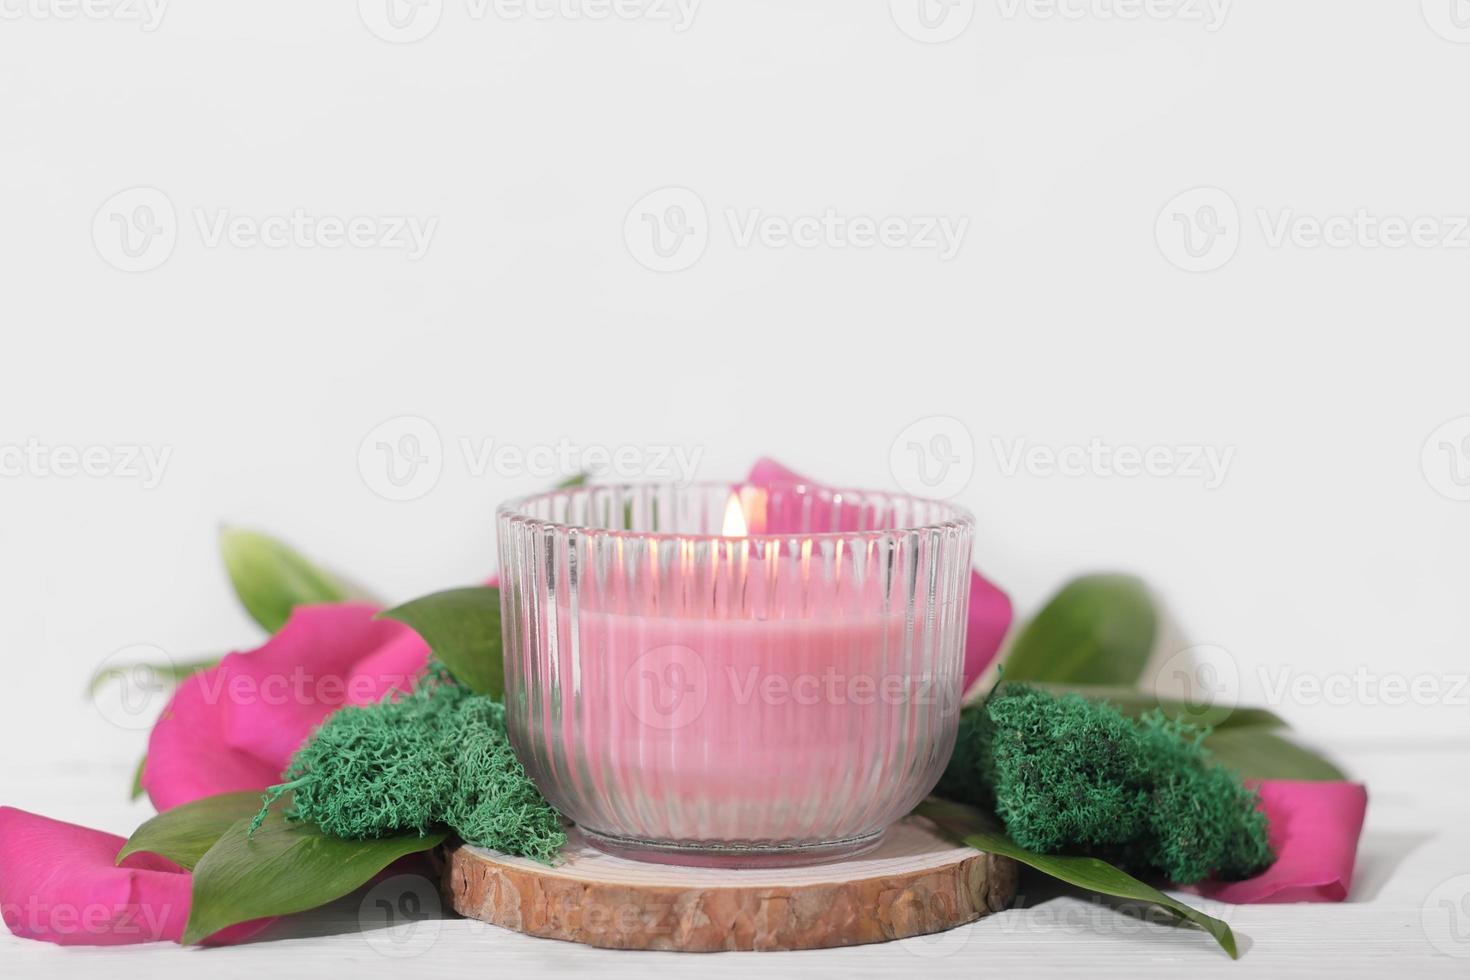 vegan plant based soy wax candle in glass jar. vegetarian pink candle made of natural soy wax on wooden podim with floral decor. photo